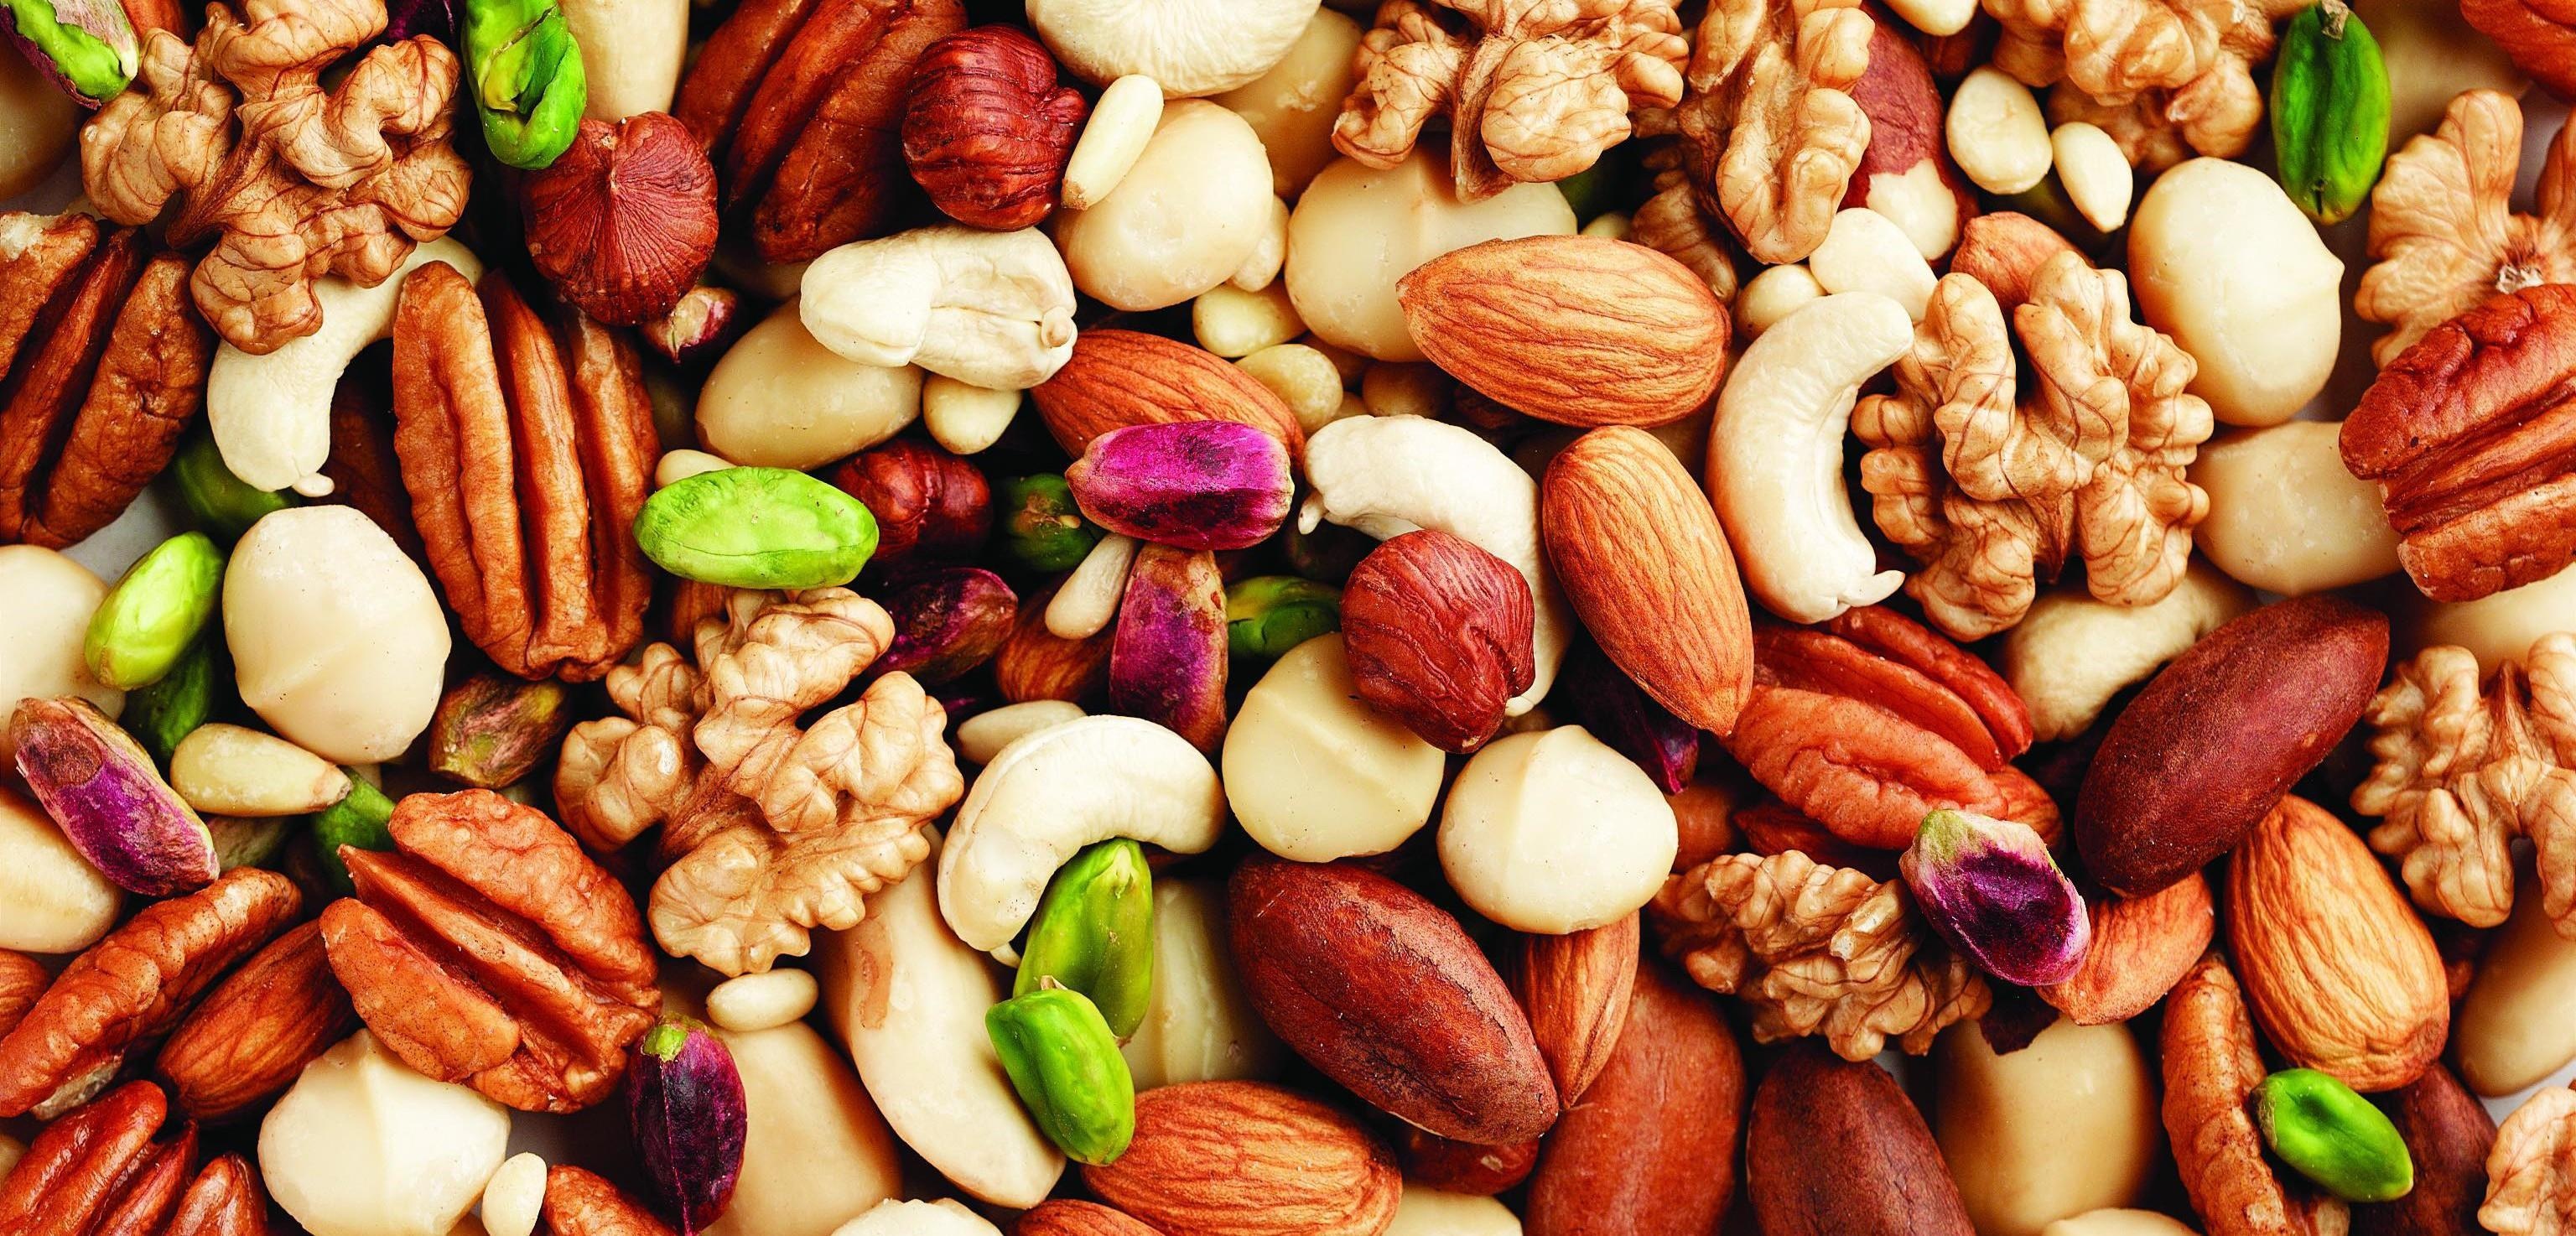 Nuts: The seeds of drupe fruits, Edible seed with a hard, inedible outer shell. 3080x1480 Dual Screen Background.